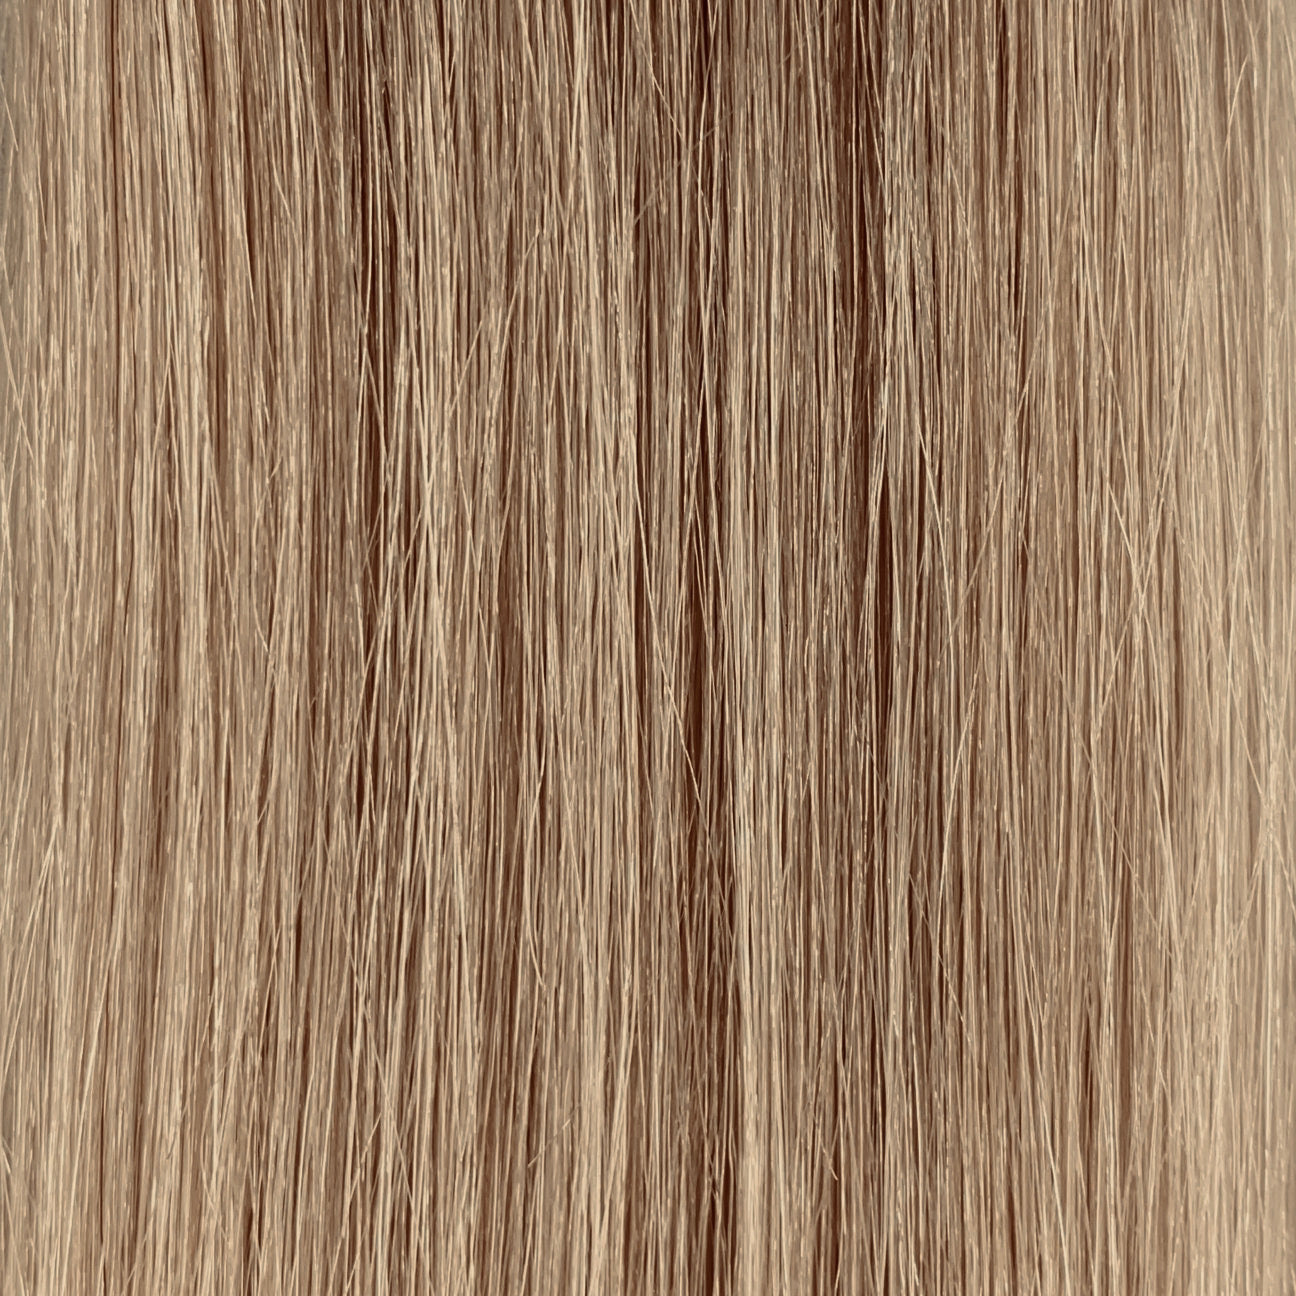 50 cm | Normal Tape Extensions | No. 10 natural blond